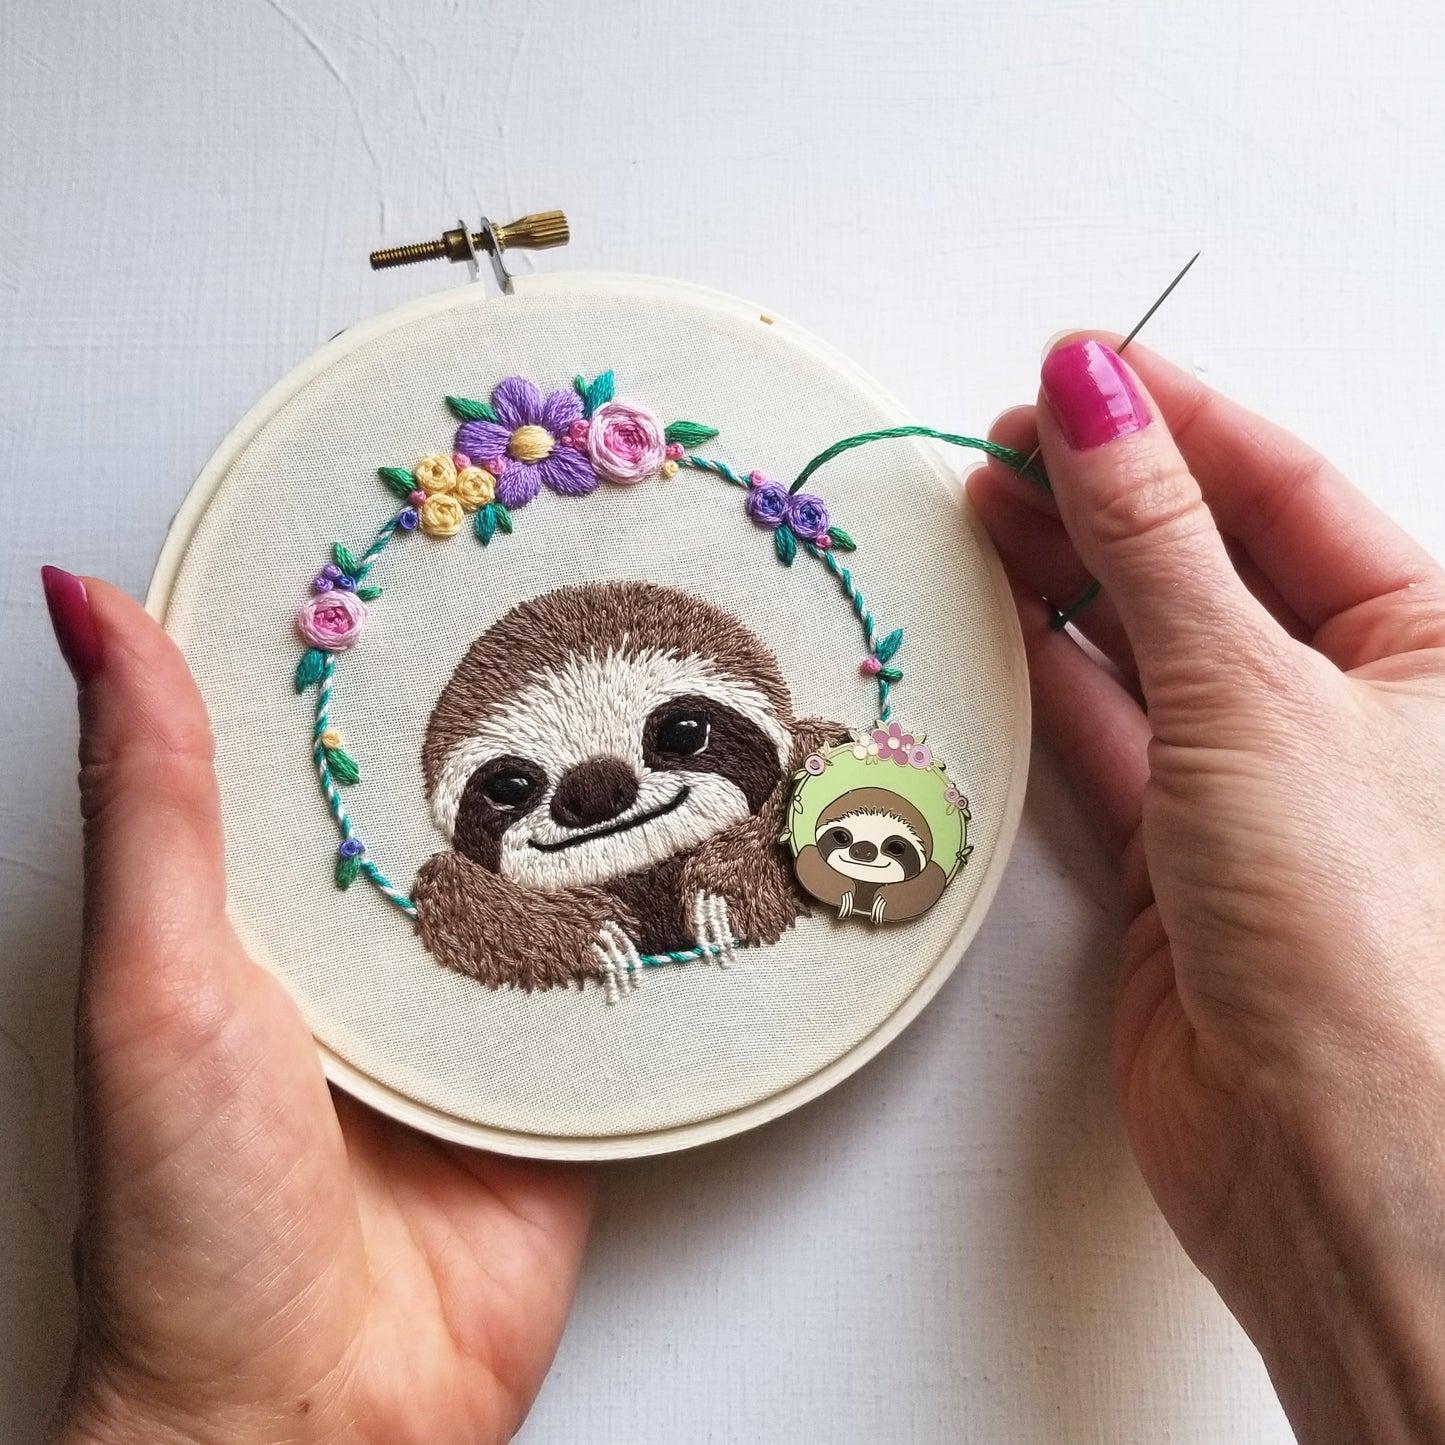 Smiling Sloth Embroidery Kit